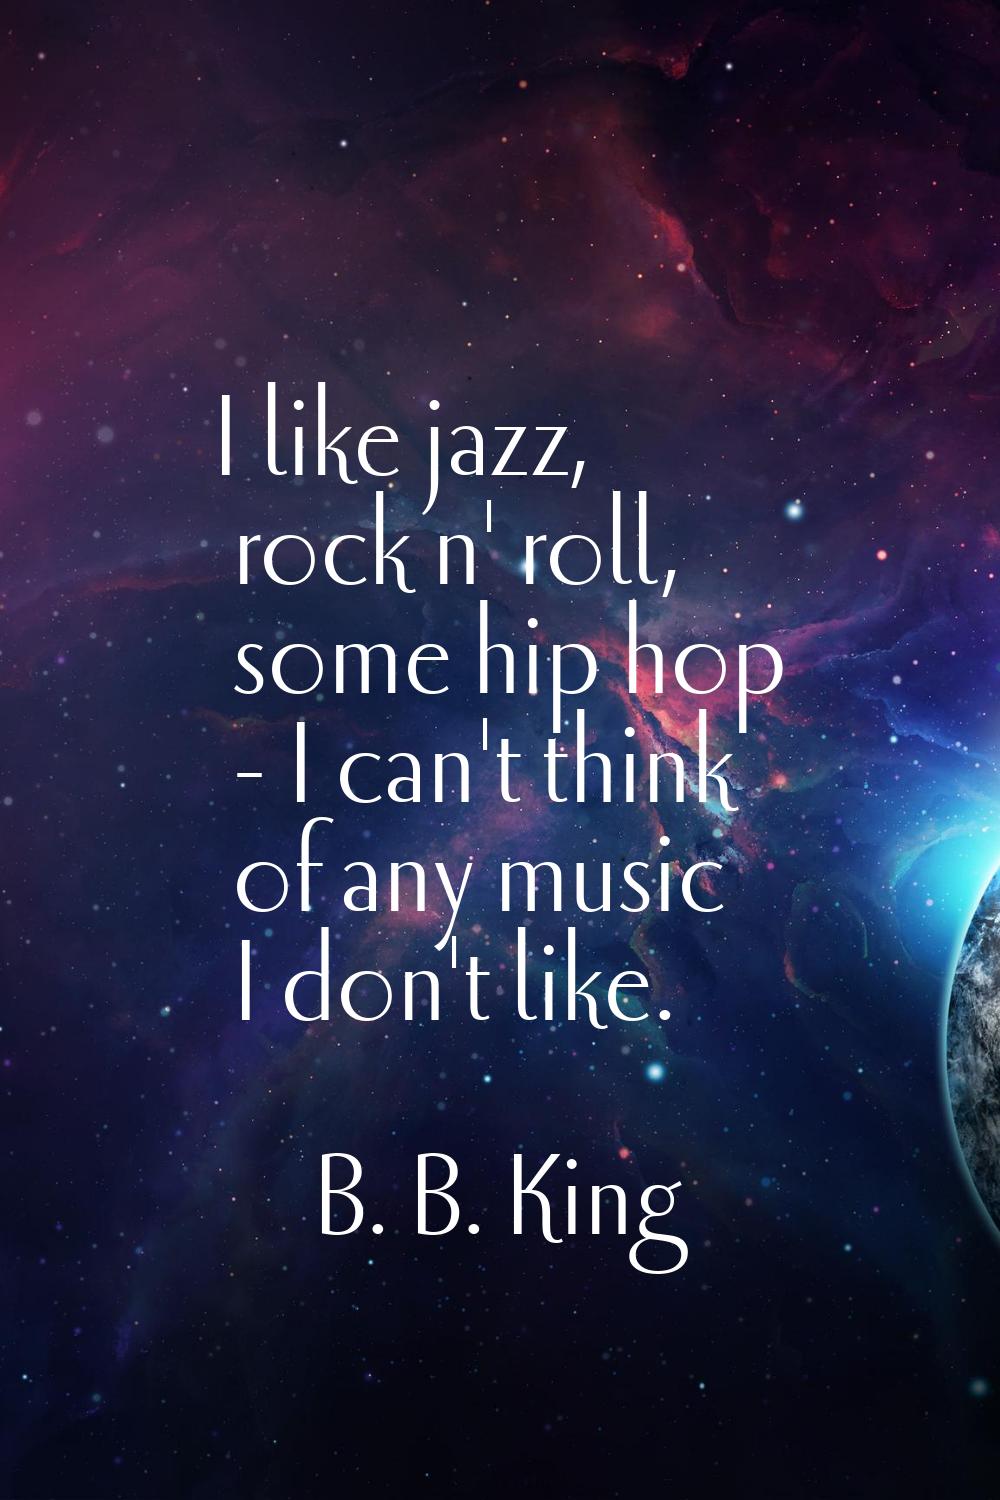 I like jazz, rock n' roll, some hip hop - I can't think of any music I don't like.